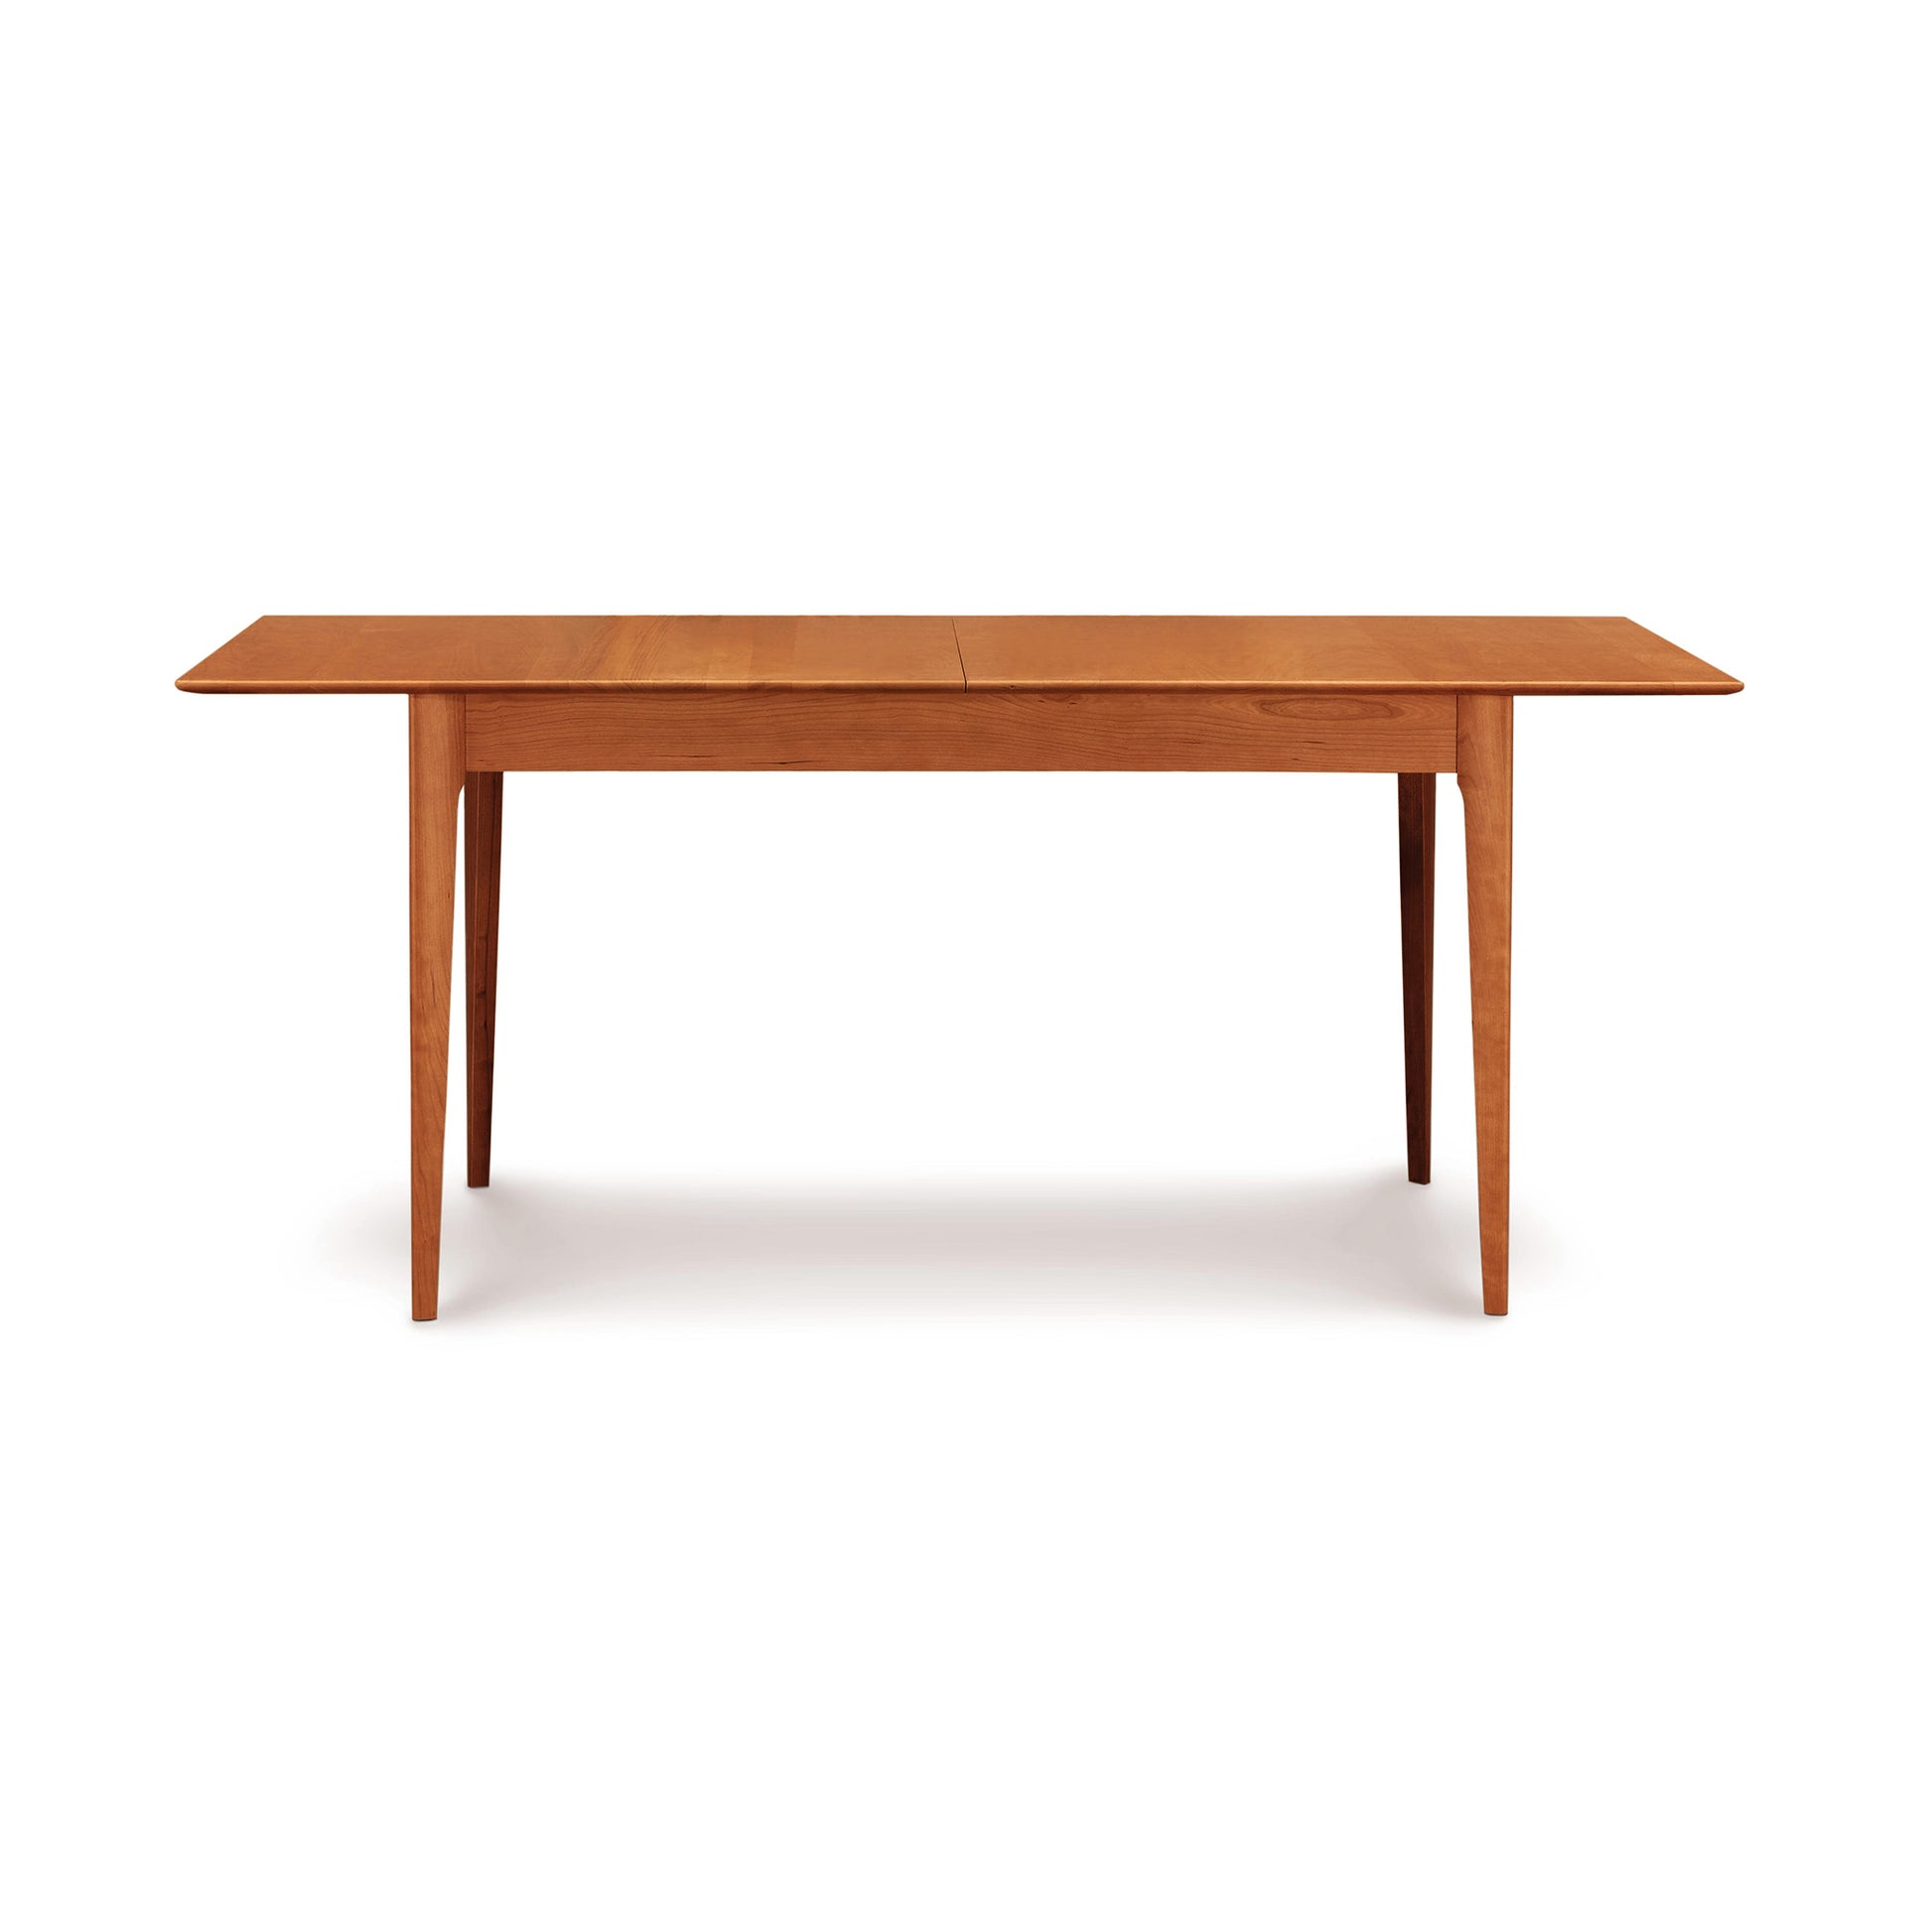 A Copeland Furniture Sarah Shaker Tapered Leg Extension Table with drop leaves against a white background, made in the USA.